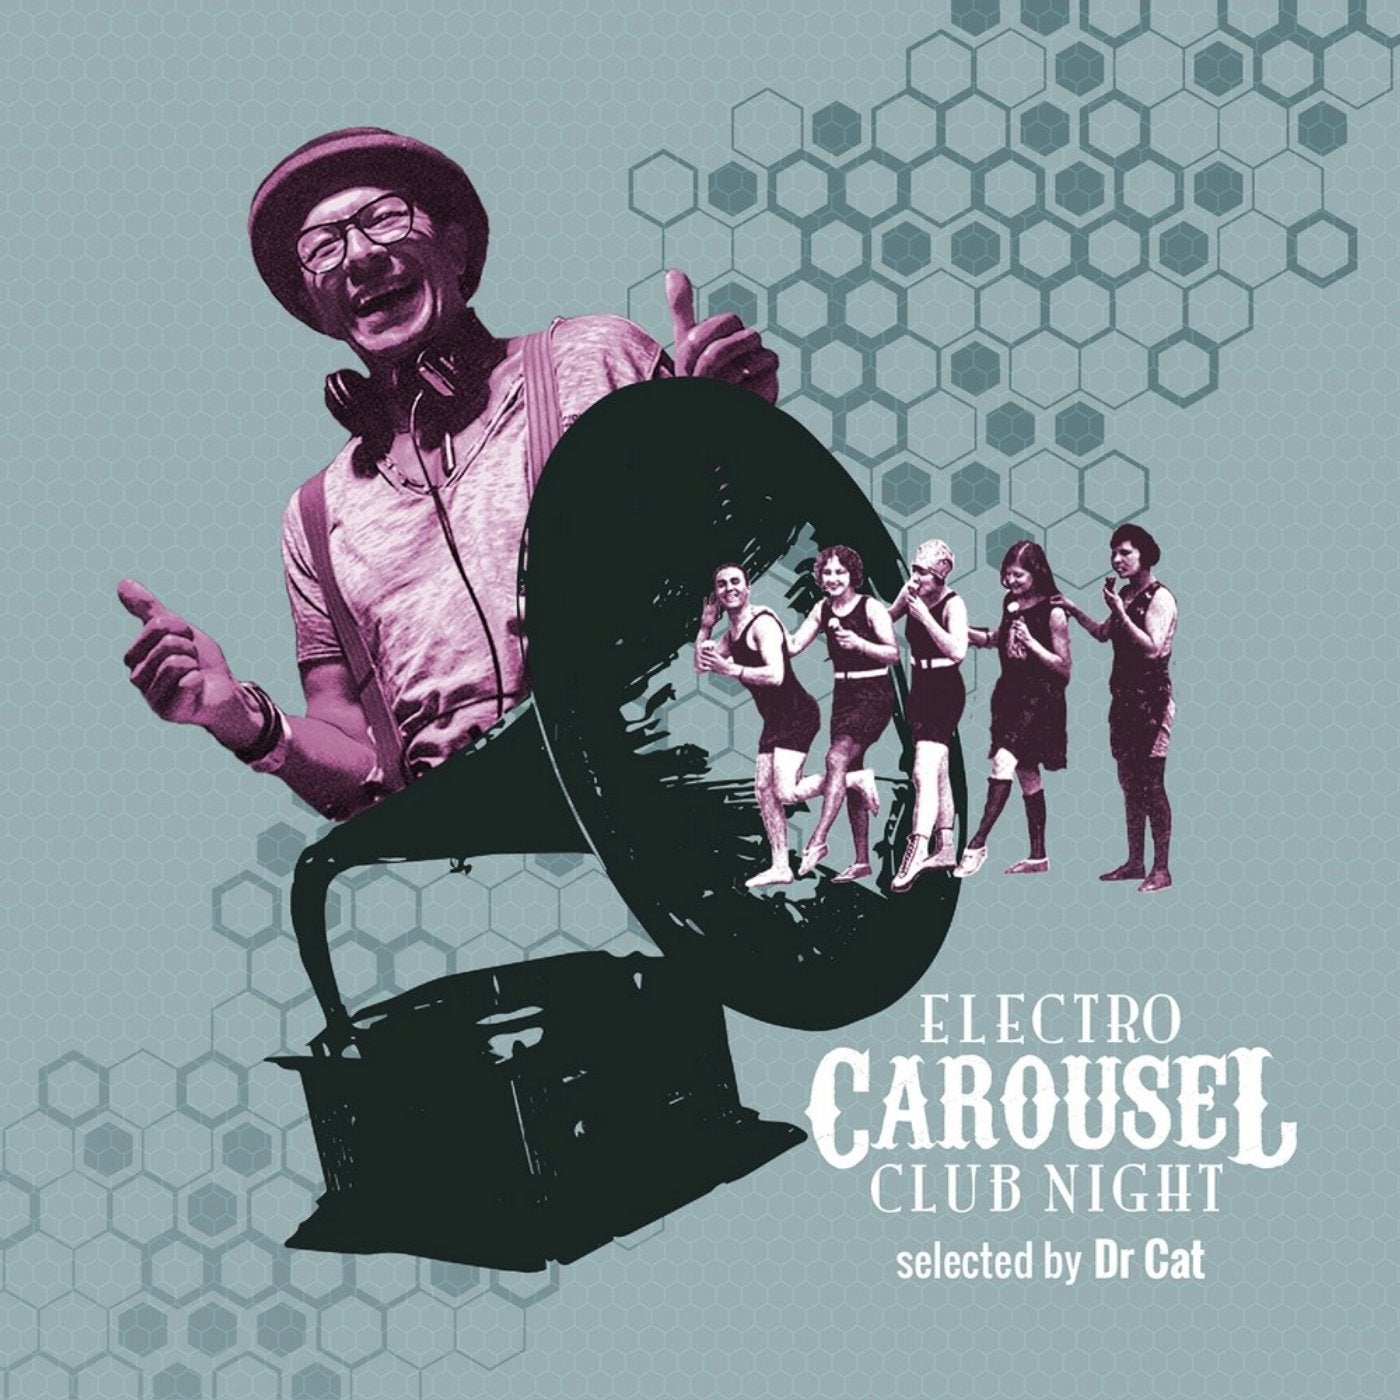 Electro Carousel Club Night (Selected by Dr Cat)